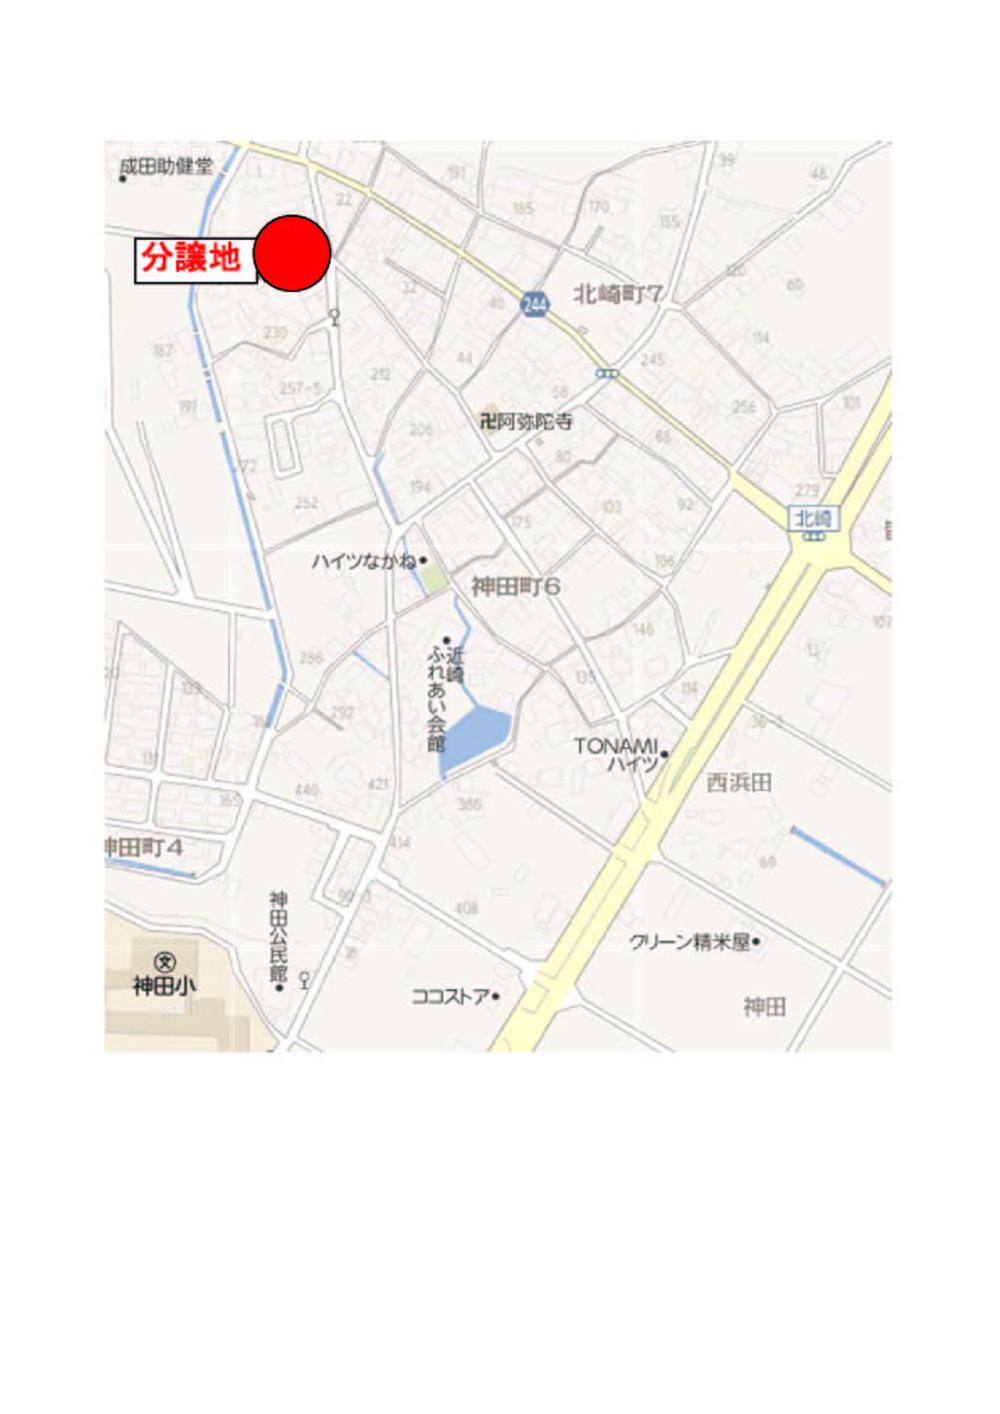 Local guide map. Please be straight north from Kanda elementary school east road.